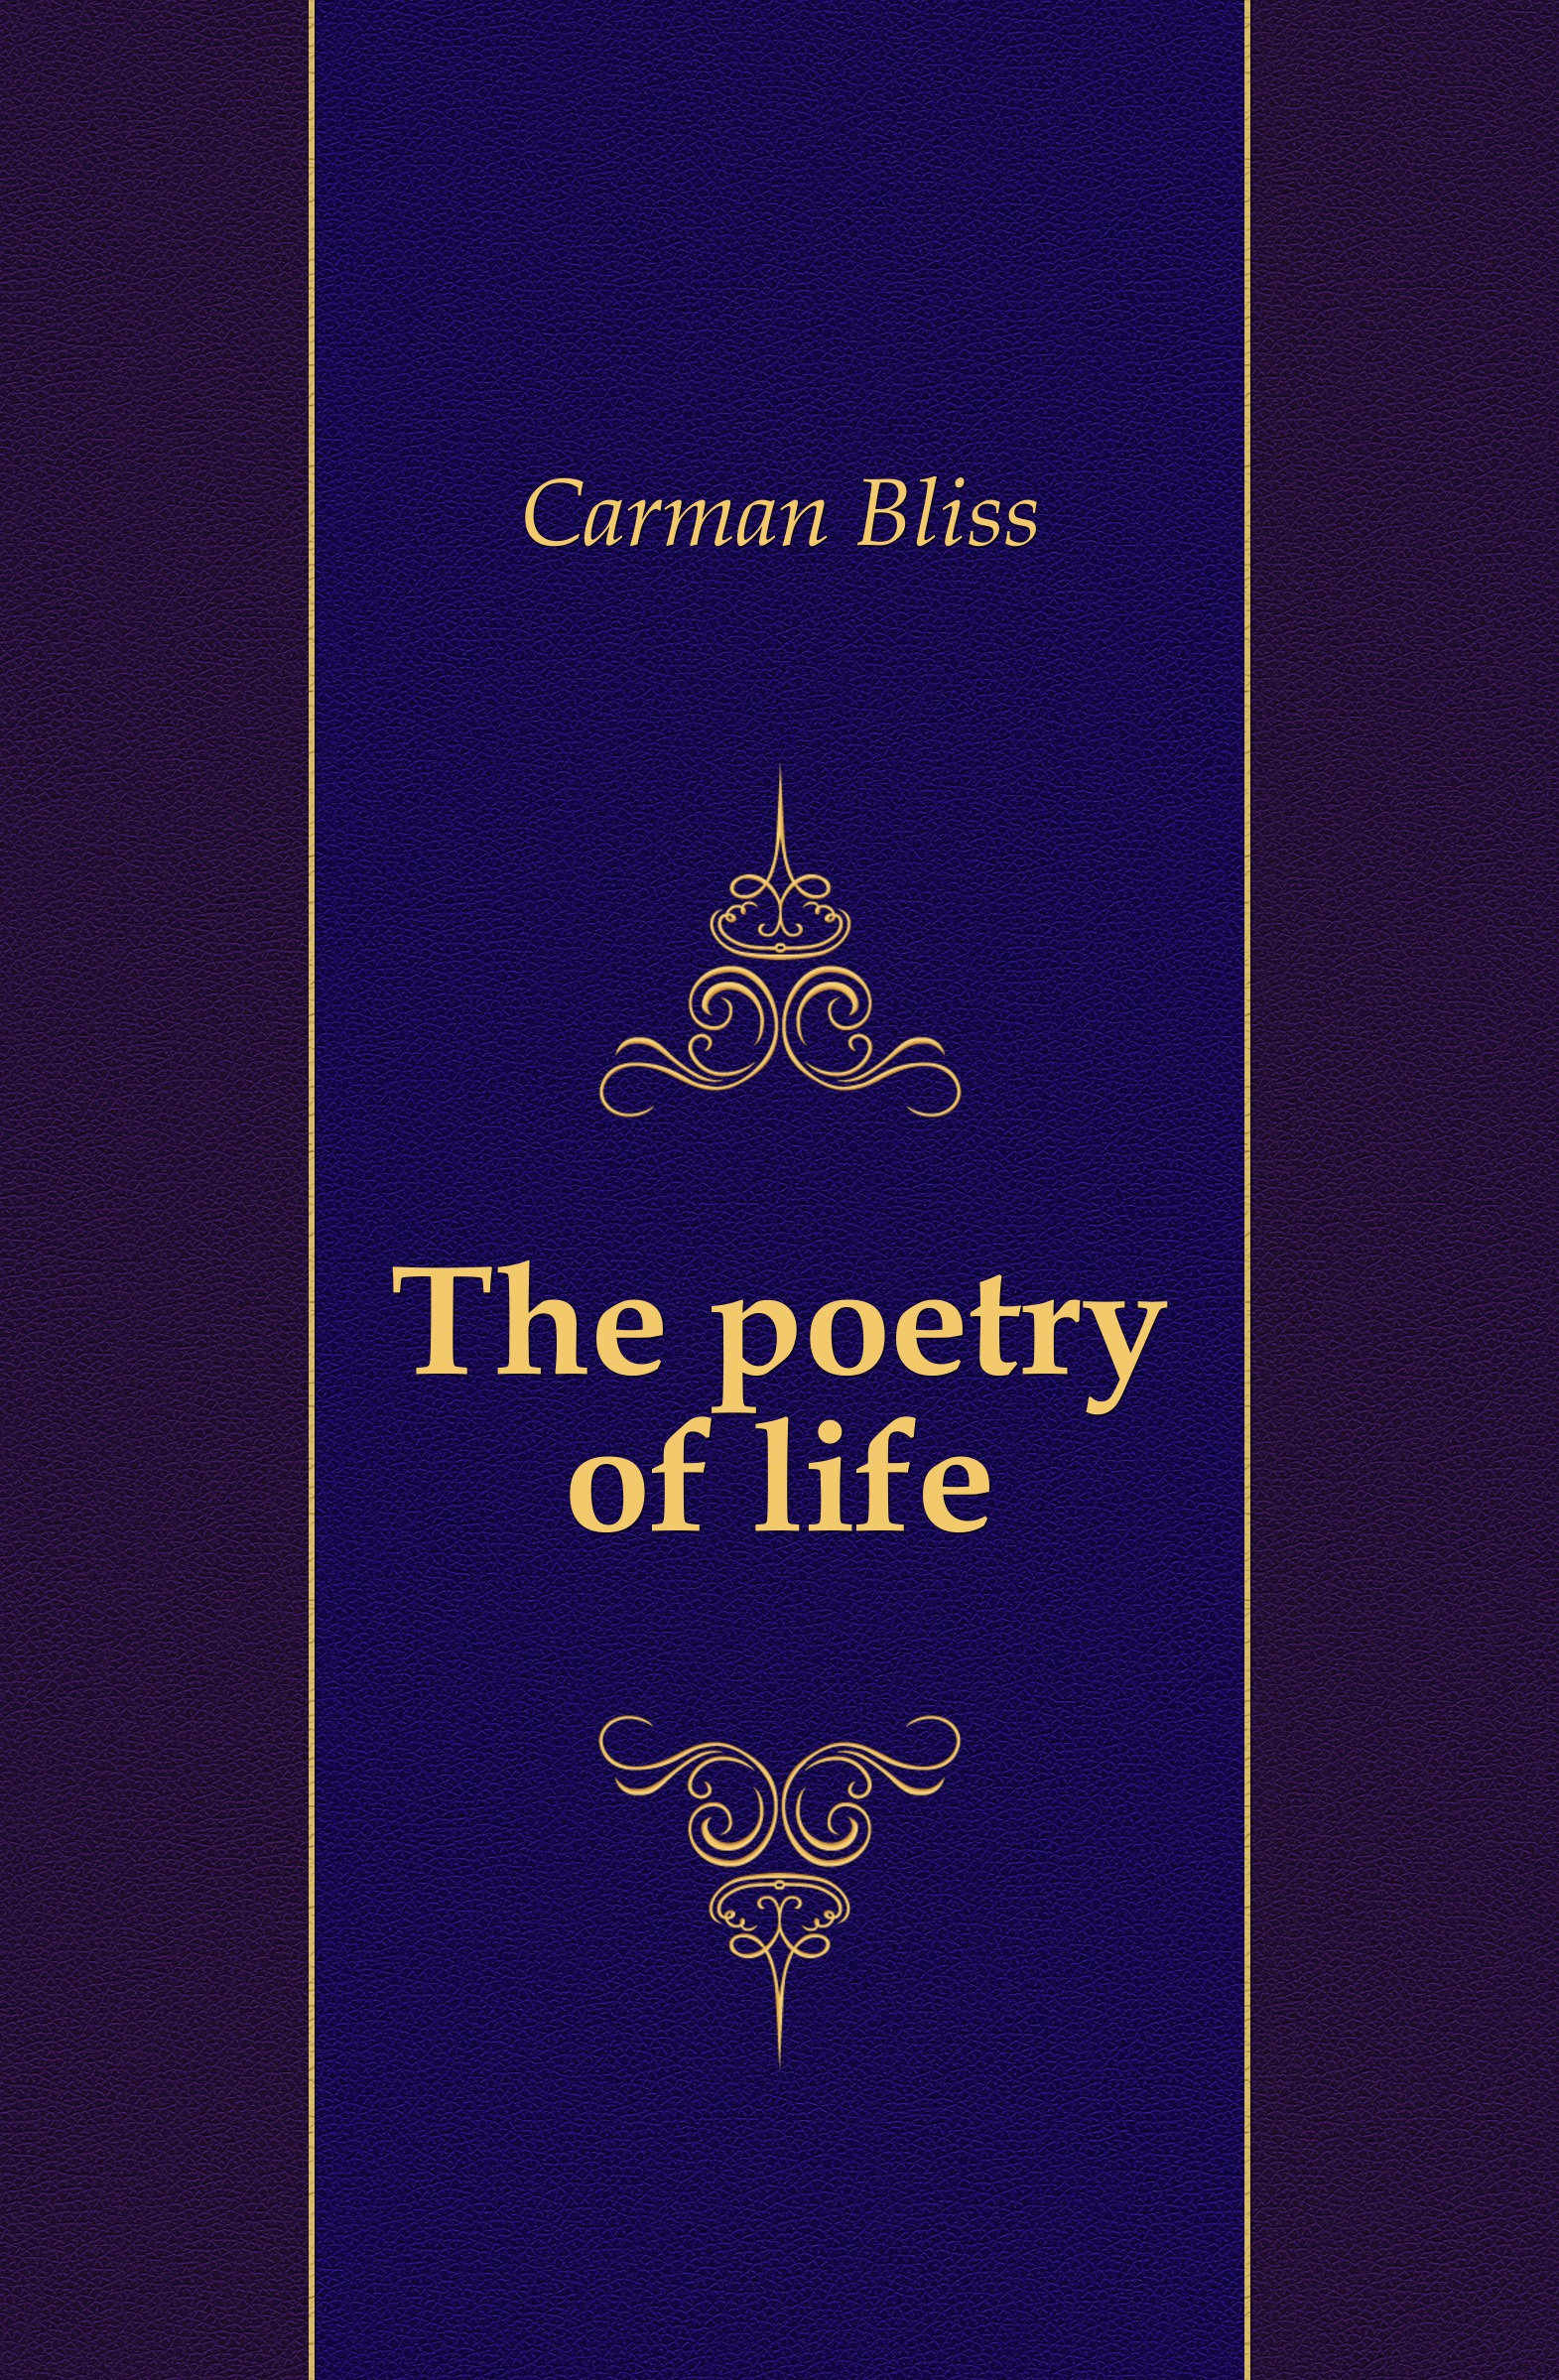 Carman Bliss The poetry of life